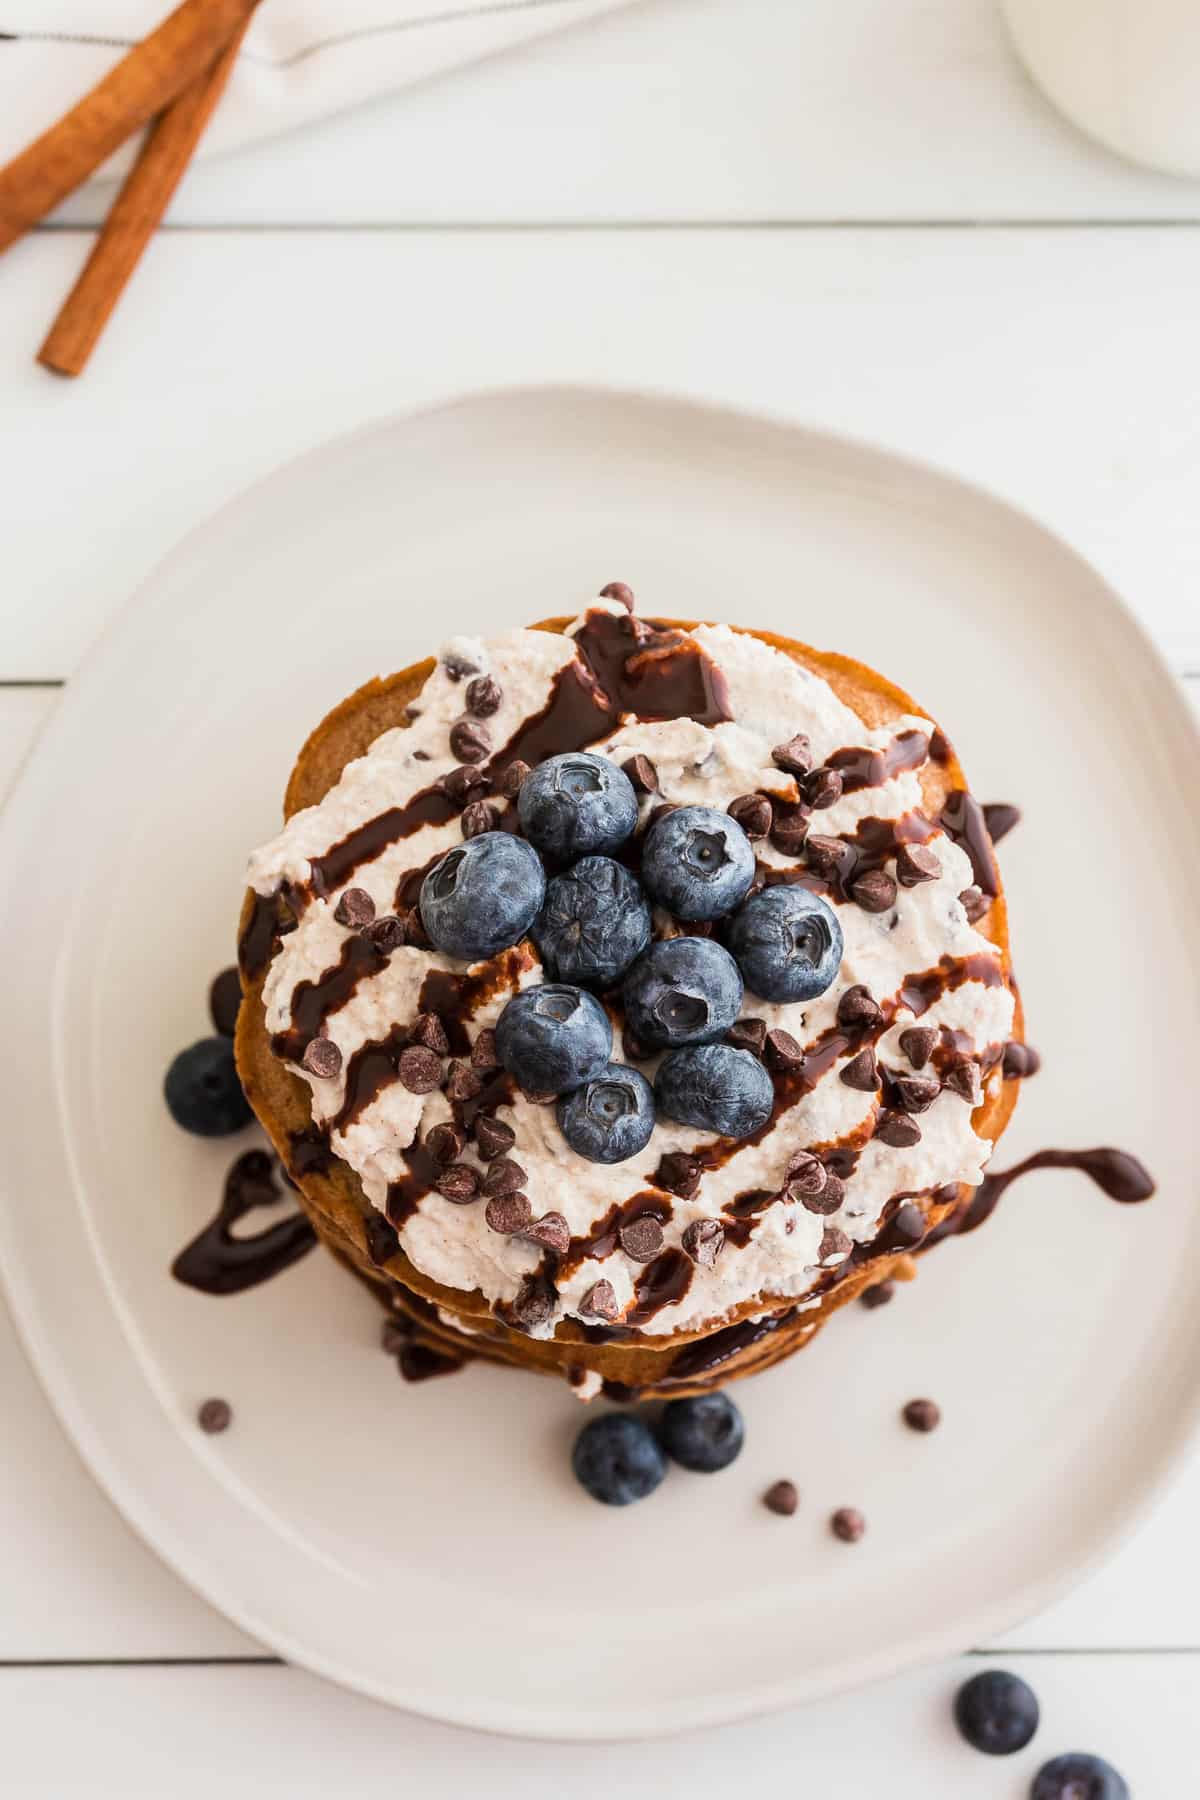 Overhead view of pancake stack topped with blueberries and chocolate chips.